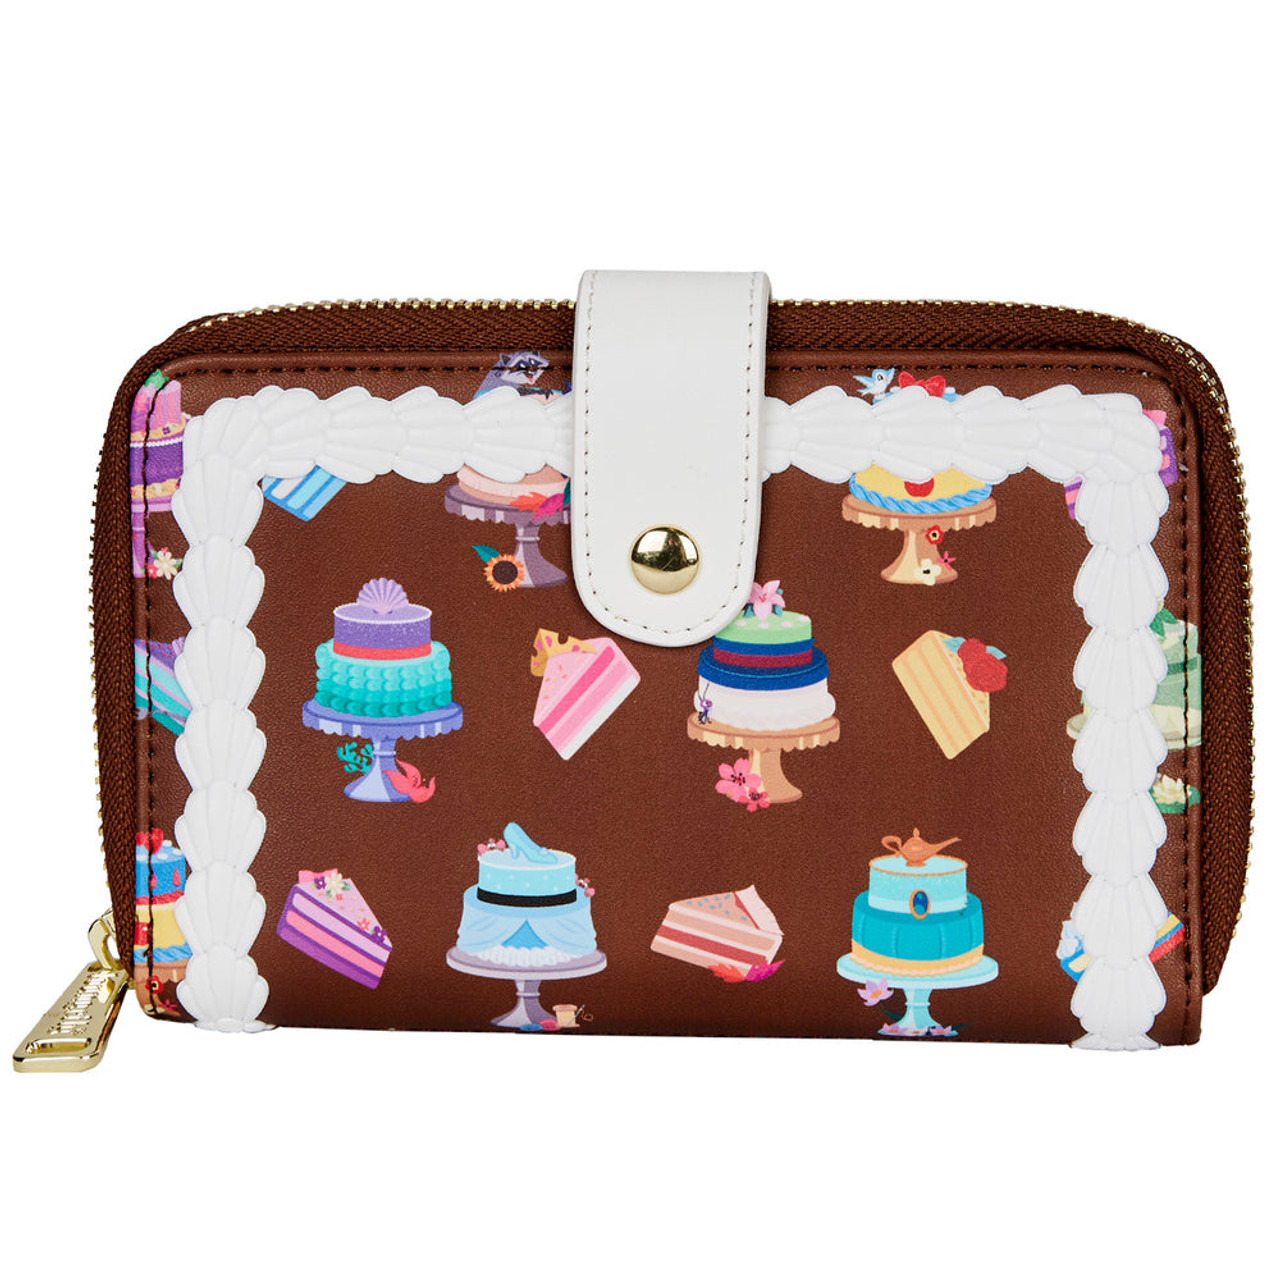 Loungefly - Disney - The Princess & the Frog - Scene Zip Around Purse -  Jac's Cave of Wonders